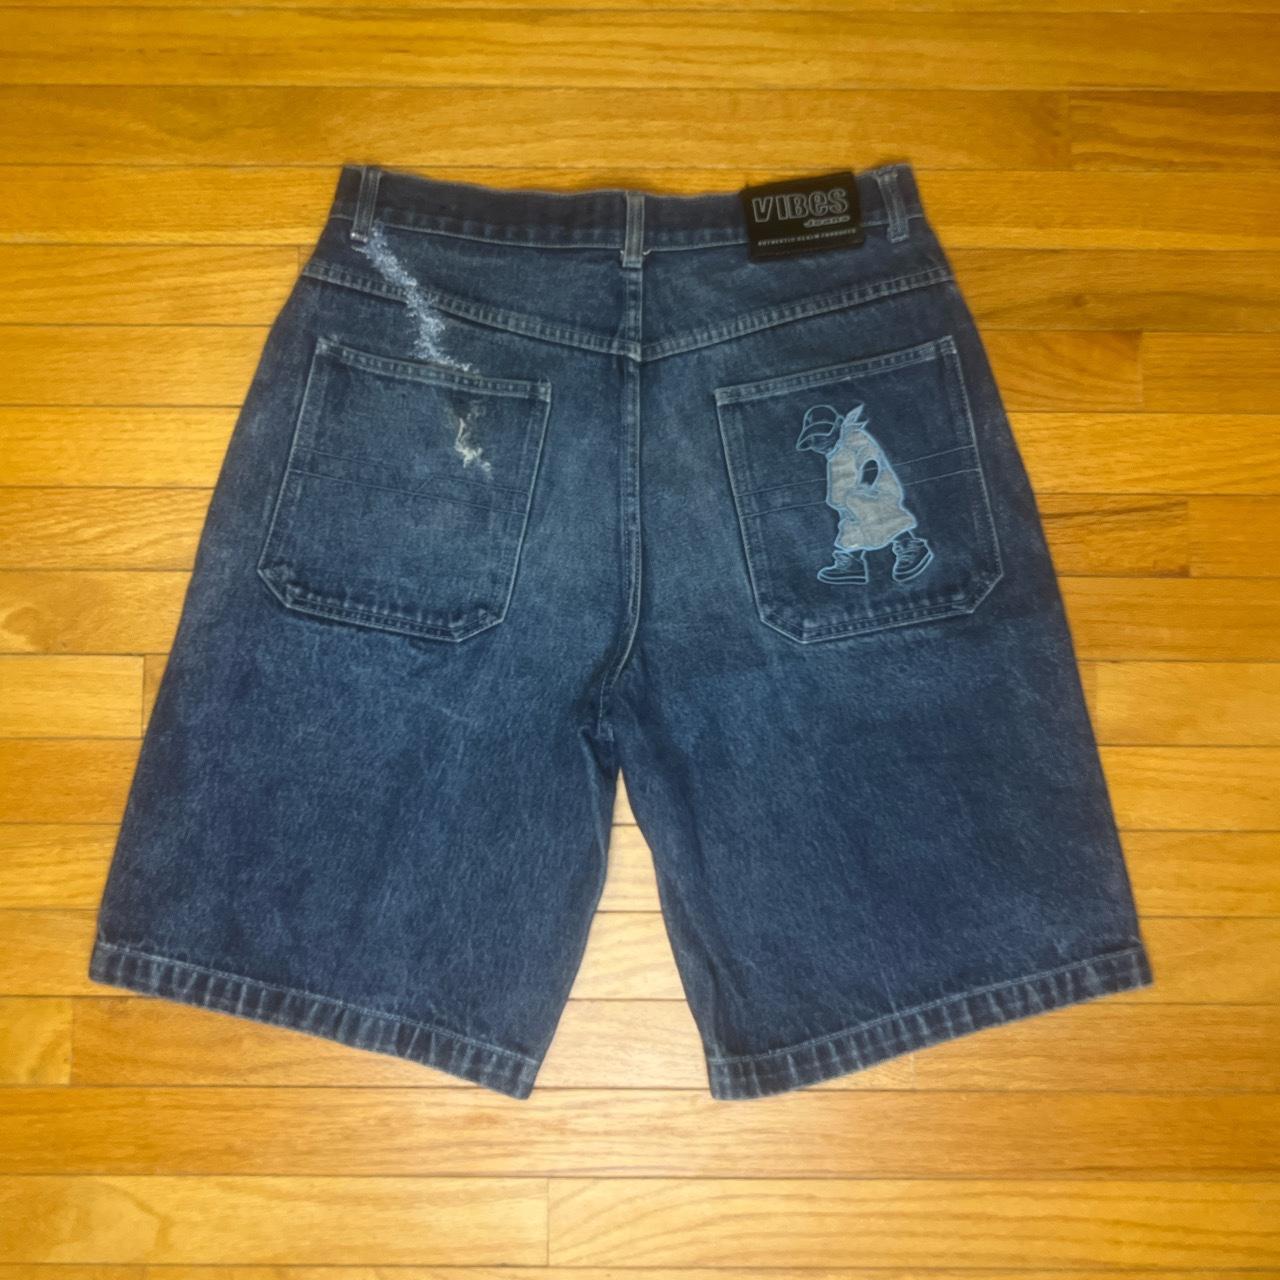 SUPER FIRE JNCO STYLE BAGGY EMBROIDERED JORTS SIZE... - Depop